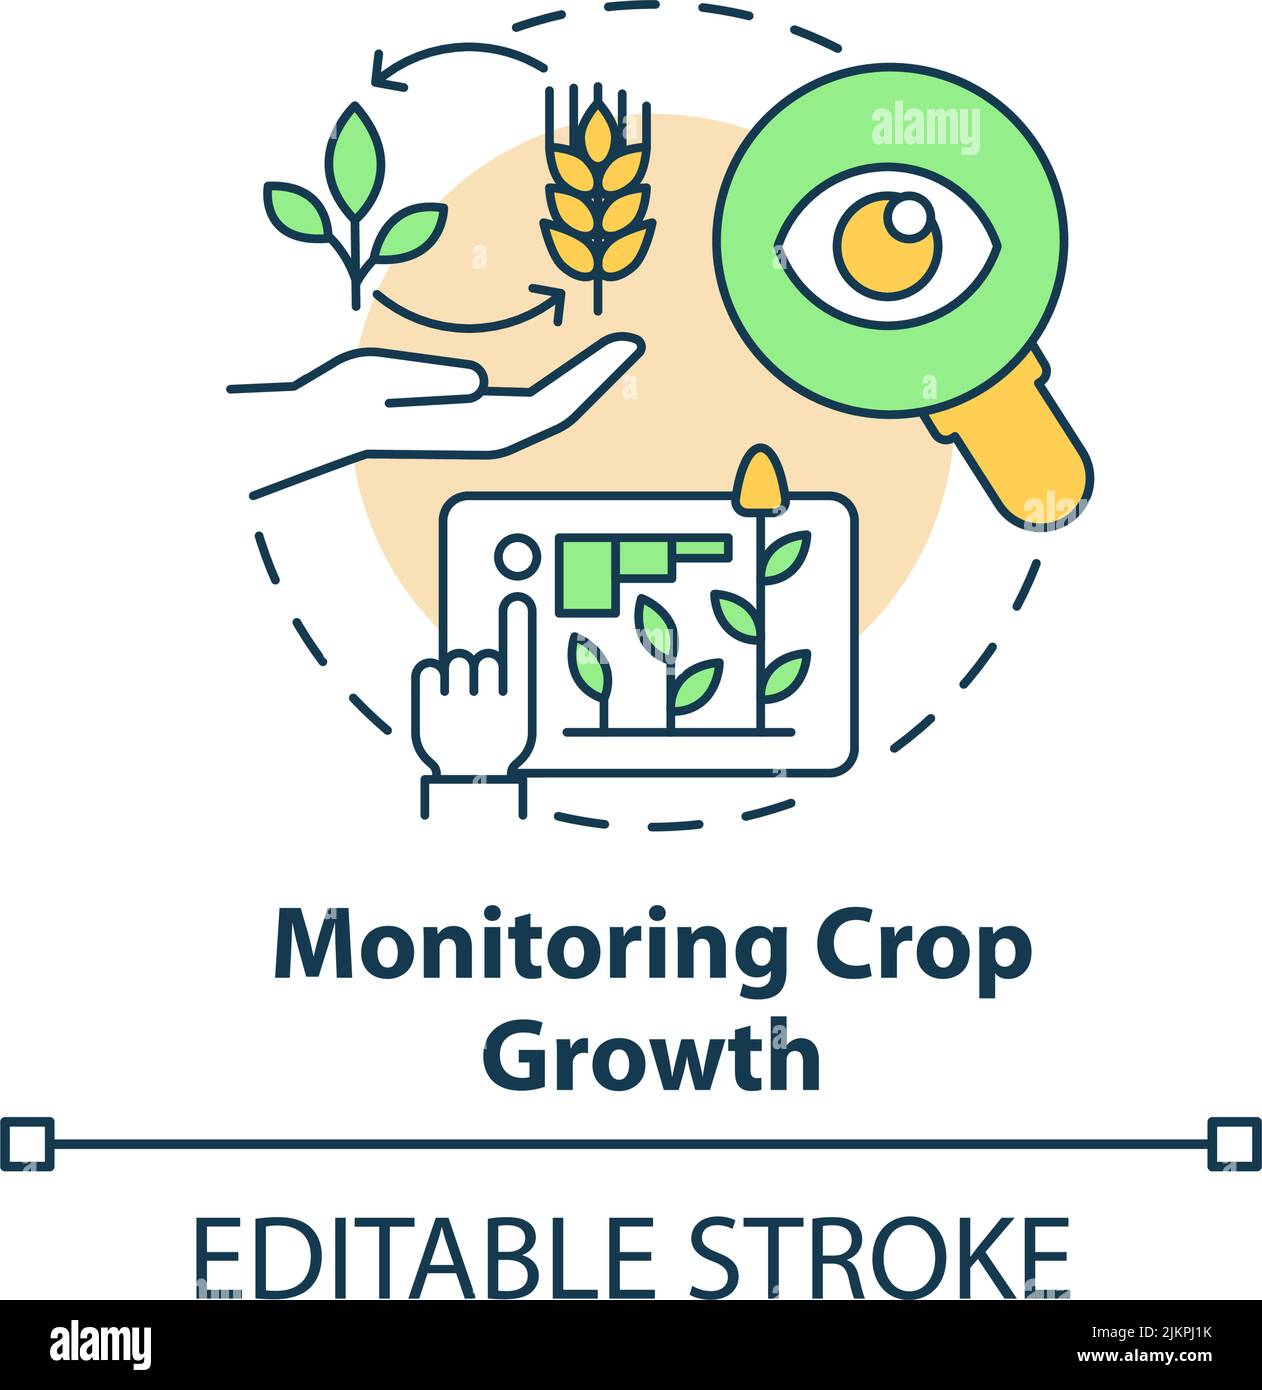 Monitoring crop growth concept icon Stock Vector